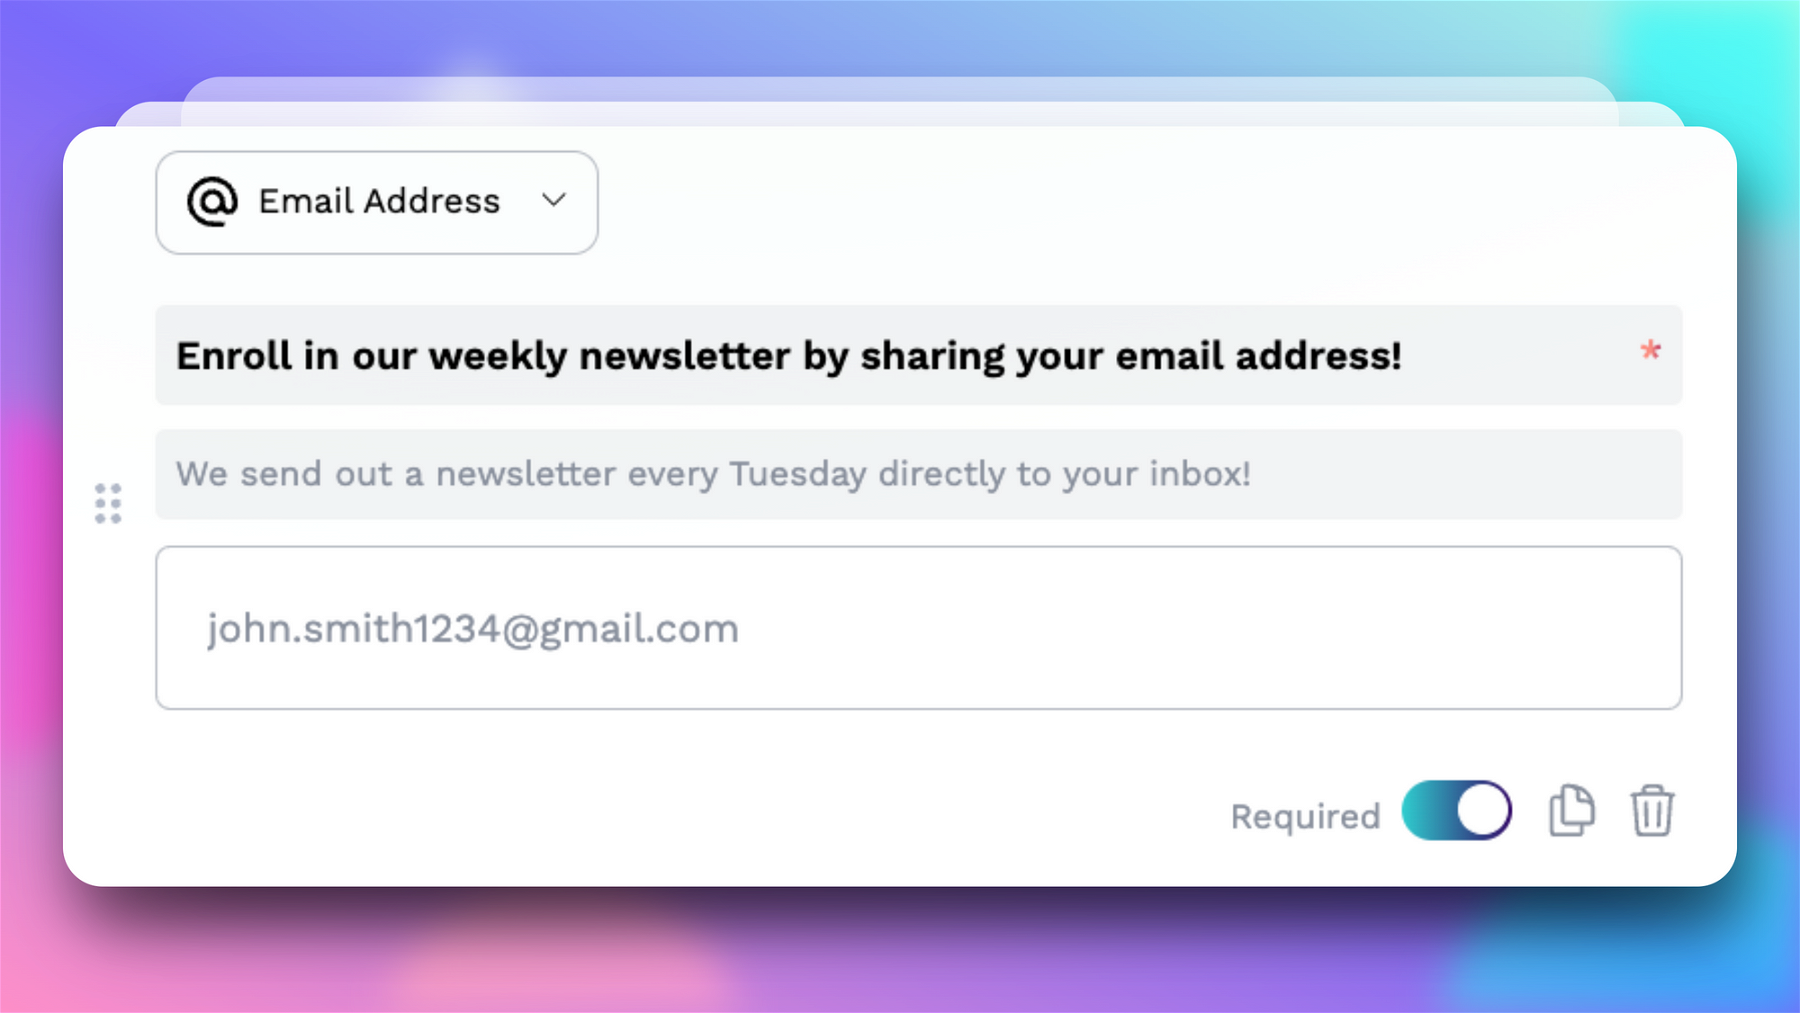 Example of an email address question to give the responder an option to enroll in a weekly newsletter by providing their email address.